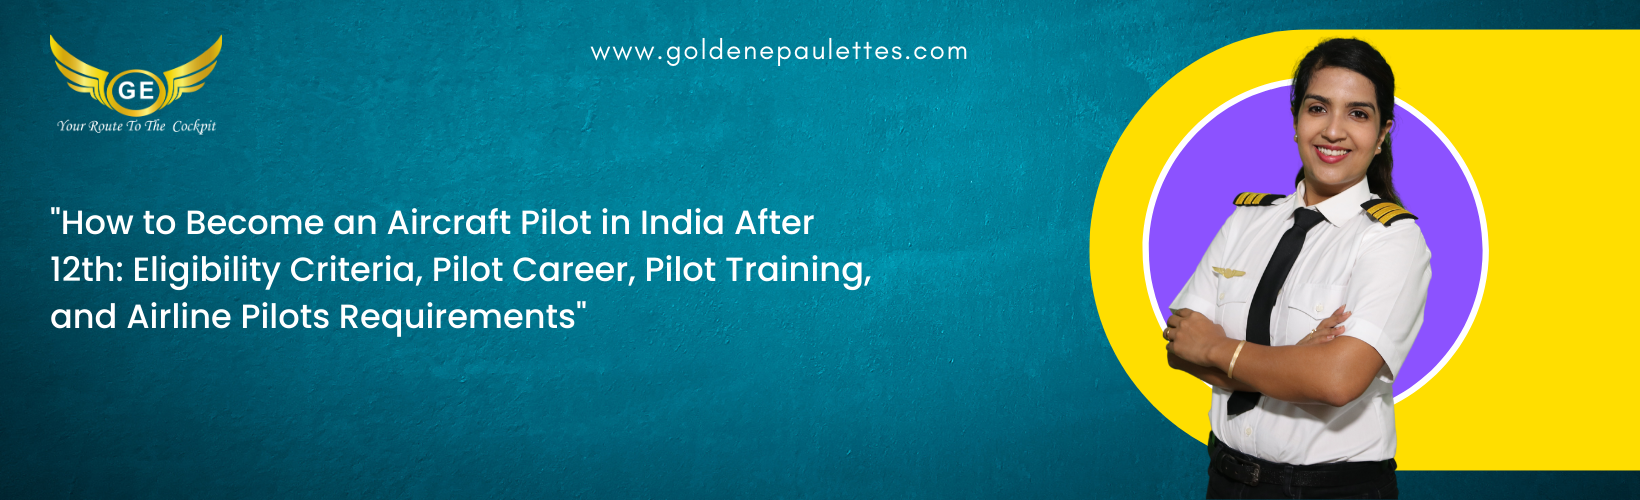 How to Become an Aircraft Pilot in India After 12th